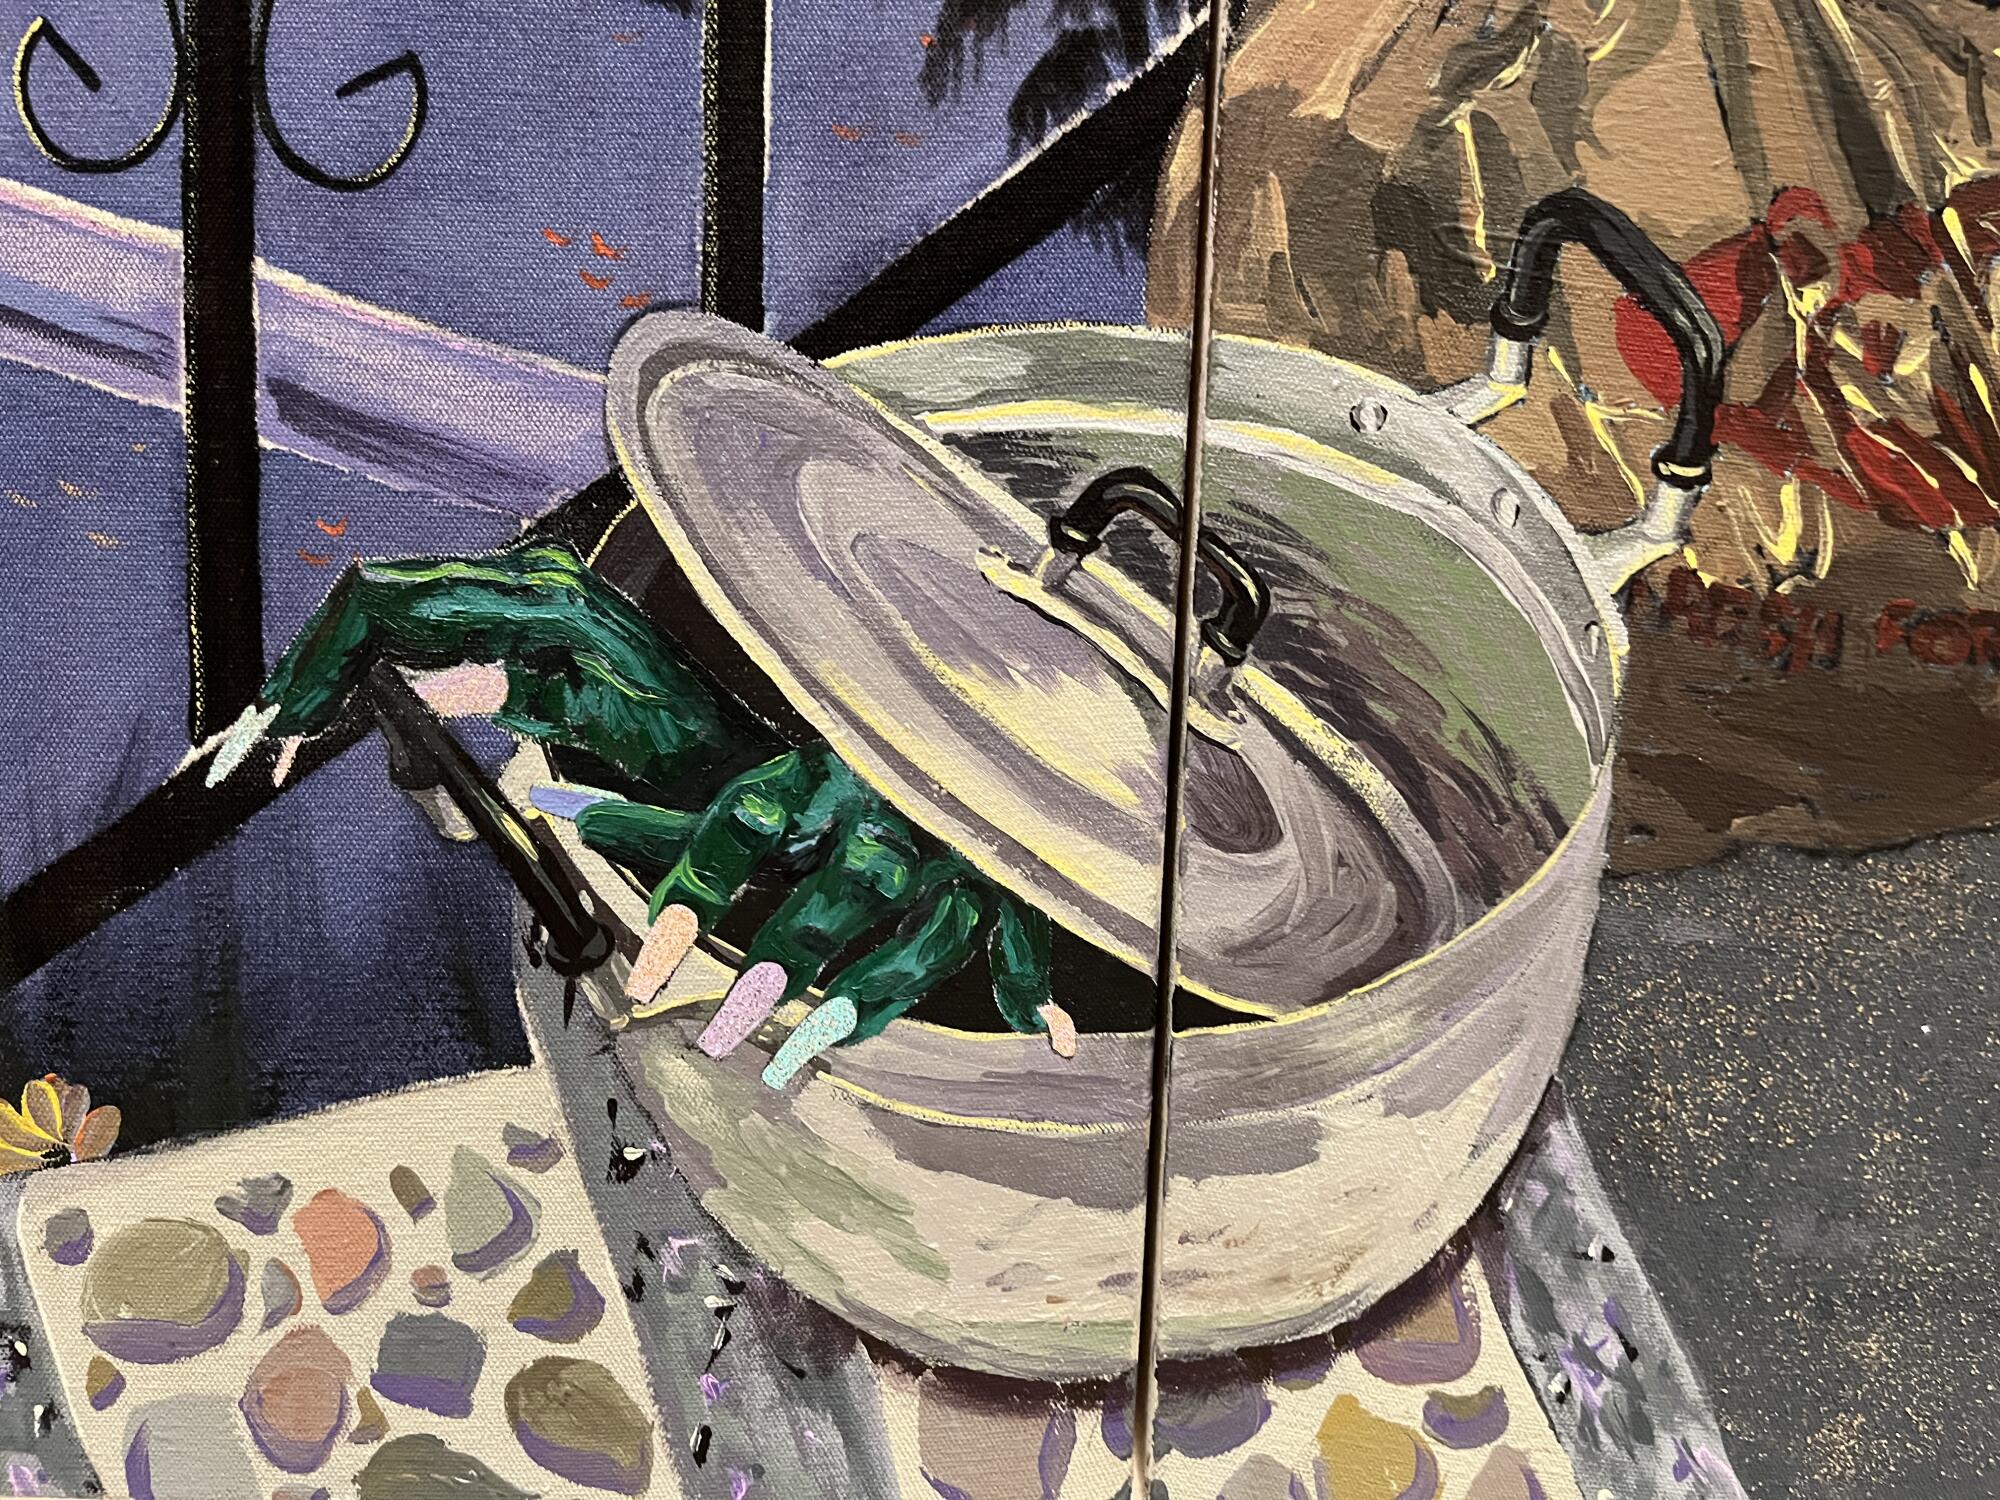 A detail of a painting shows two green hands, with multicolored nail tips, emerging from a pot on a stepping stone.